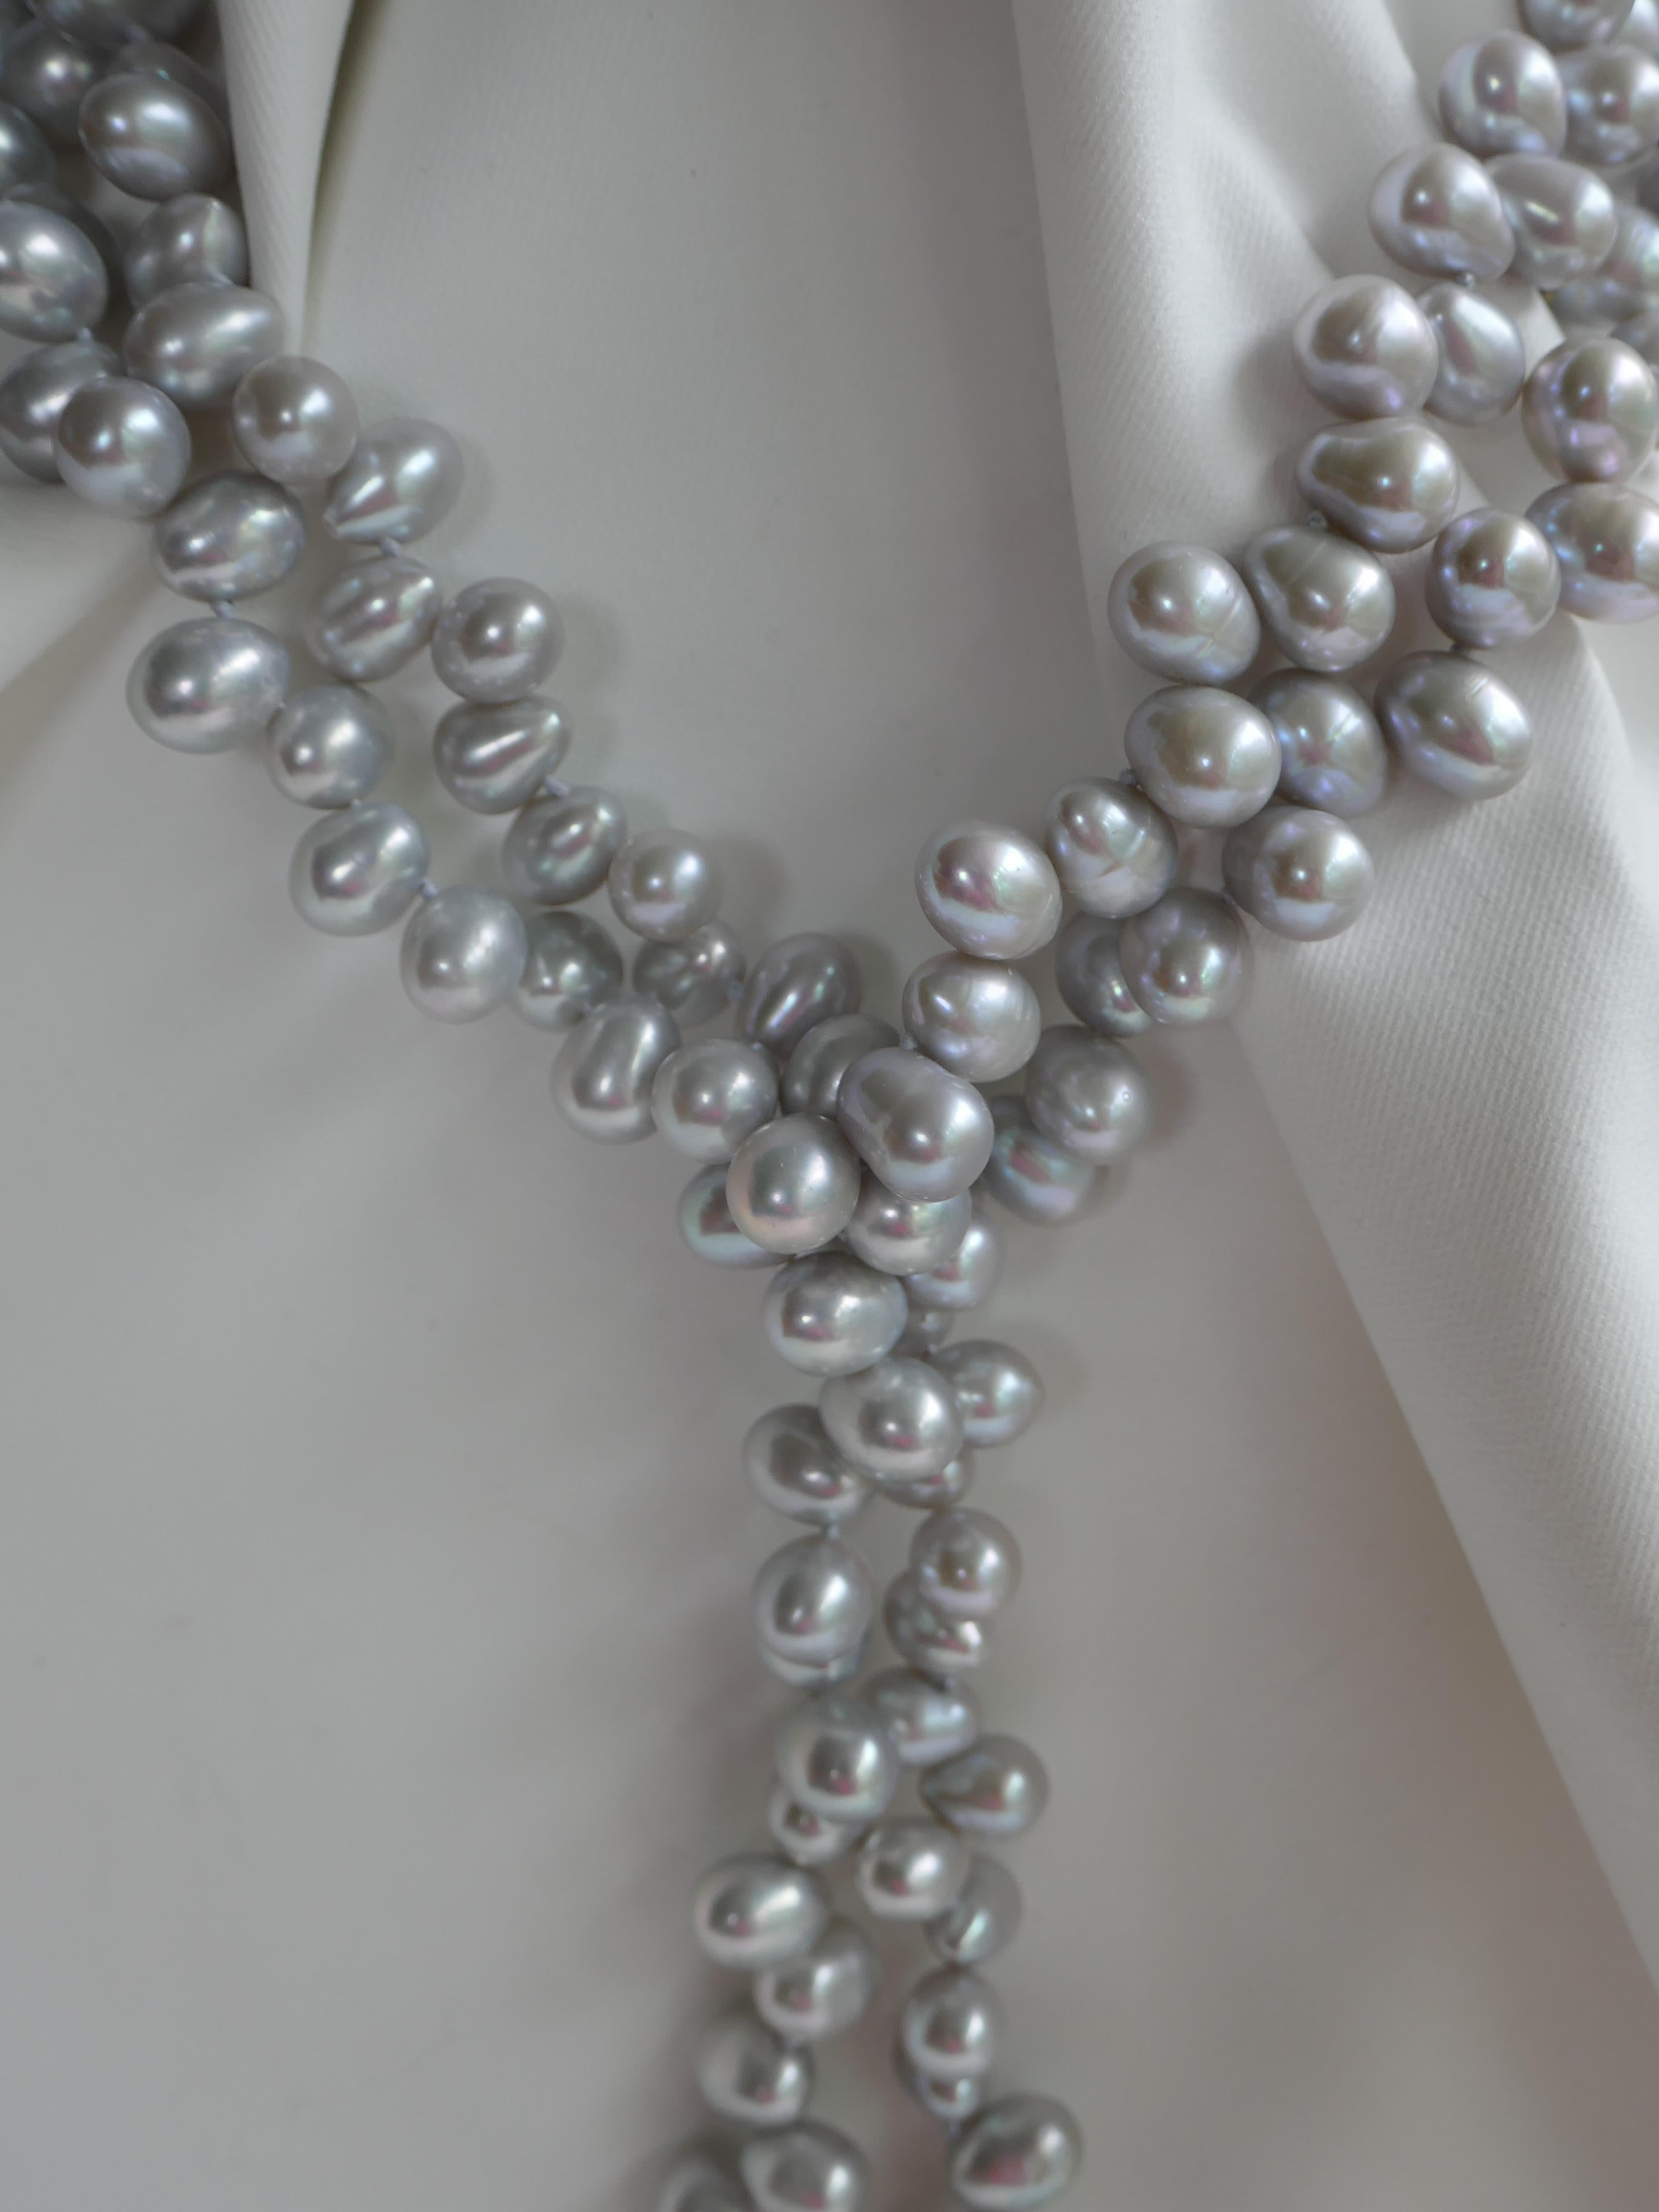 The drop cultured pearls in this necklace are Platinum in color and finished with a keshi sterling silver chain tassel, and baroque cultured pearls.  The drop cultured pearls 9-9.5mm and  have great luster and very little blemishes. The tassel is 3